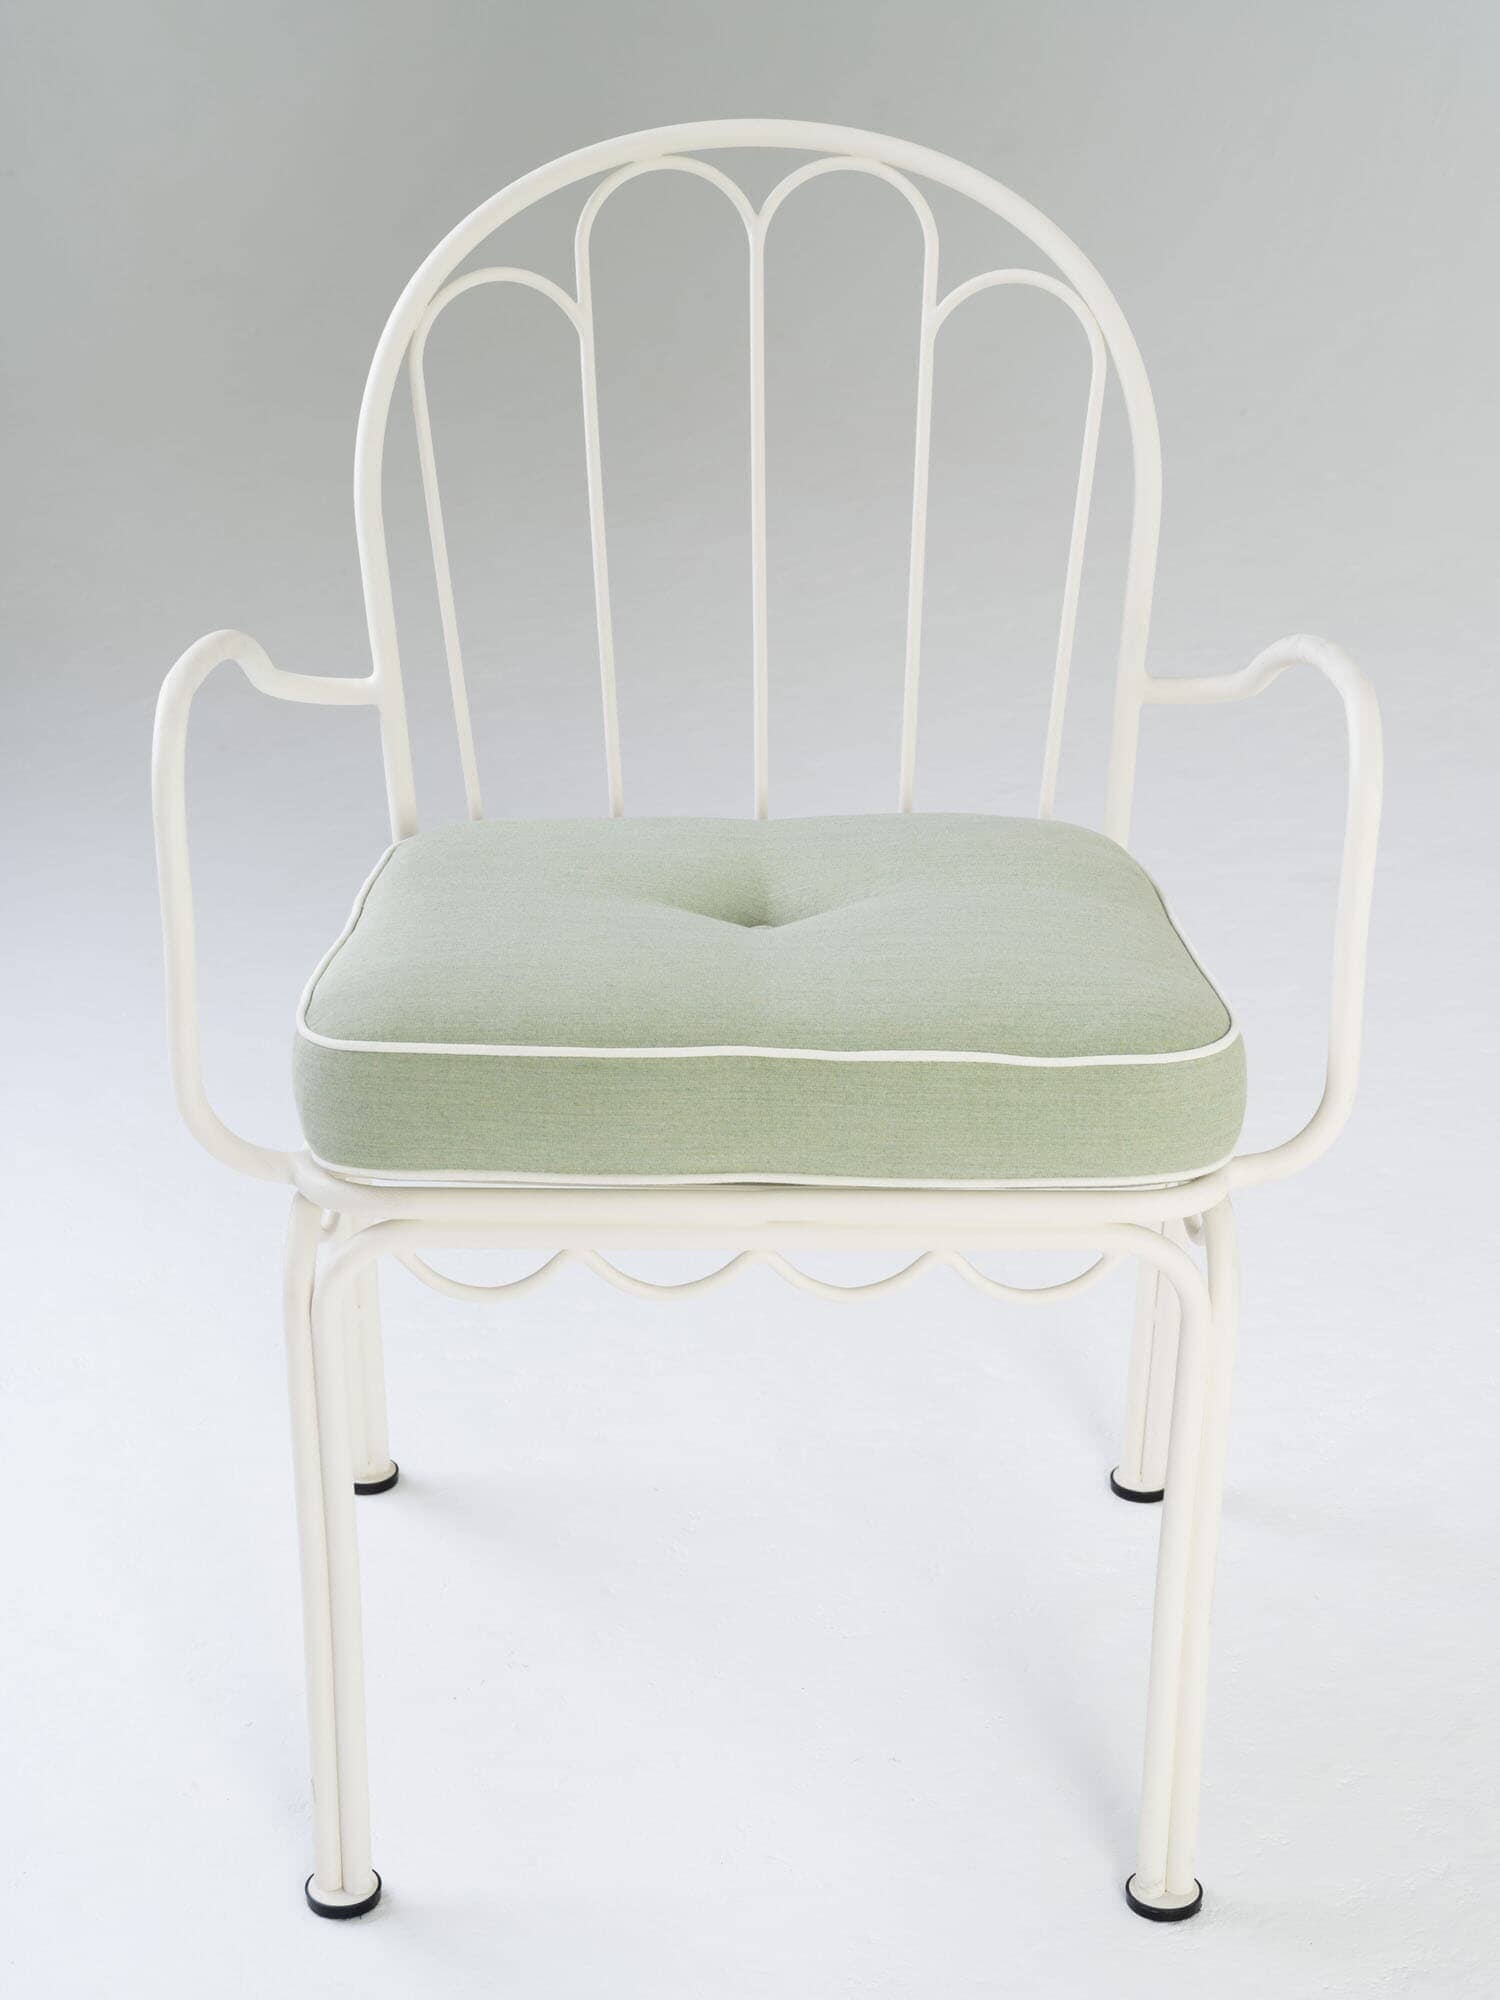 top view of green chair cushion and white metal chair in studio